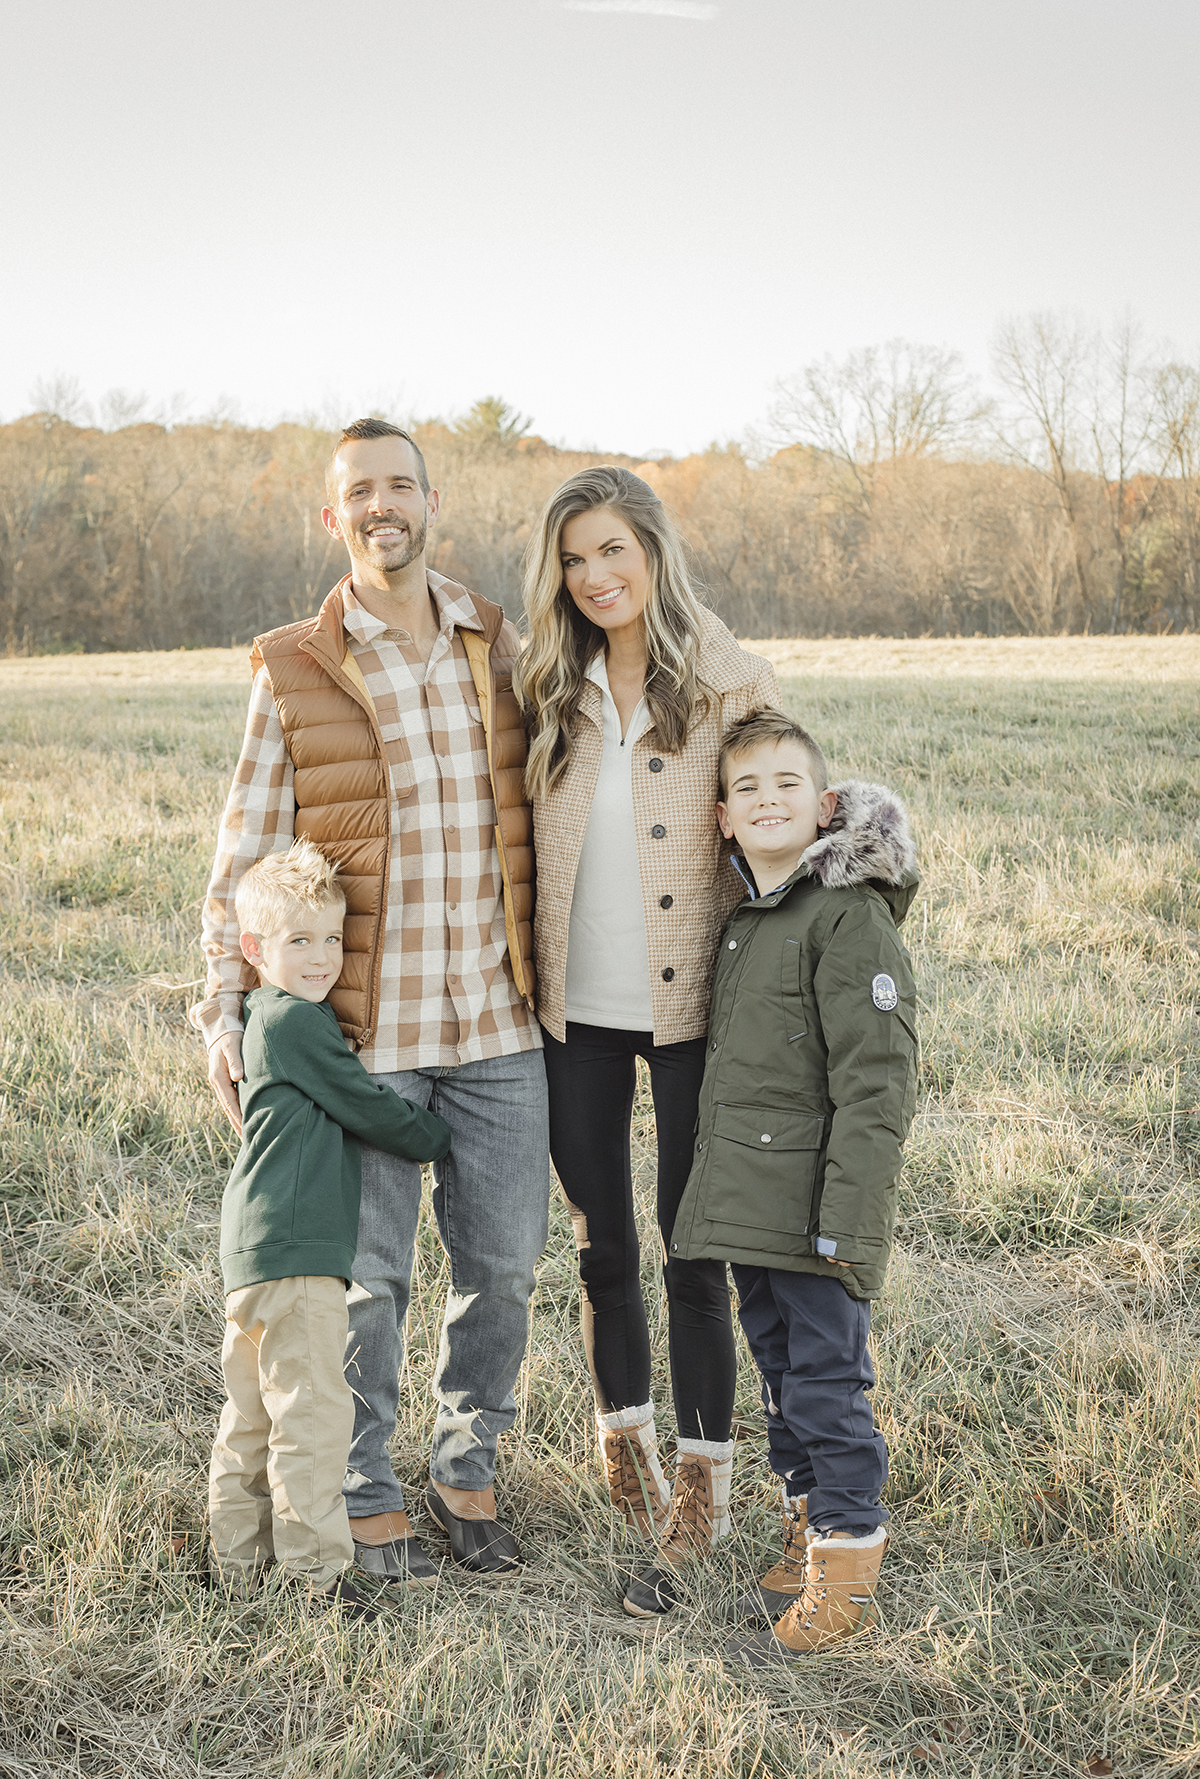 Outdoor Fall Family Photo Outfits Pinteresting Plans